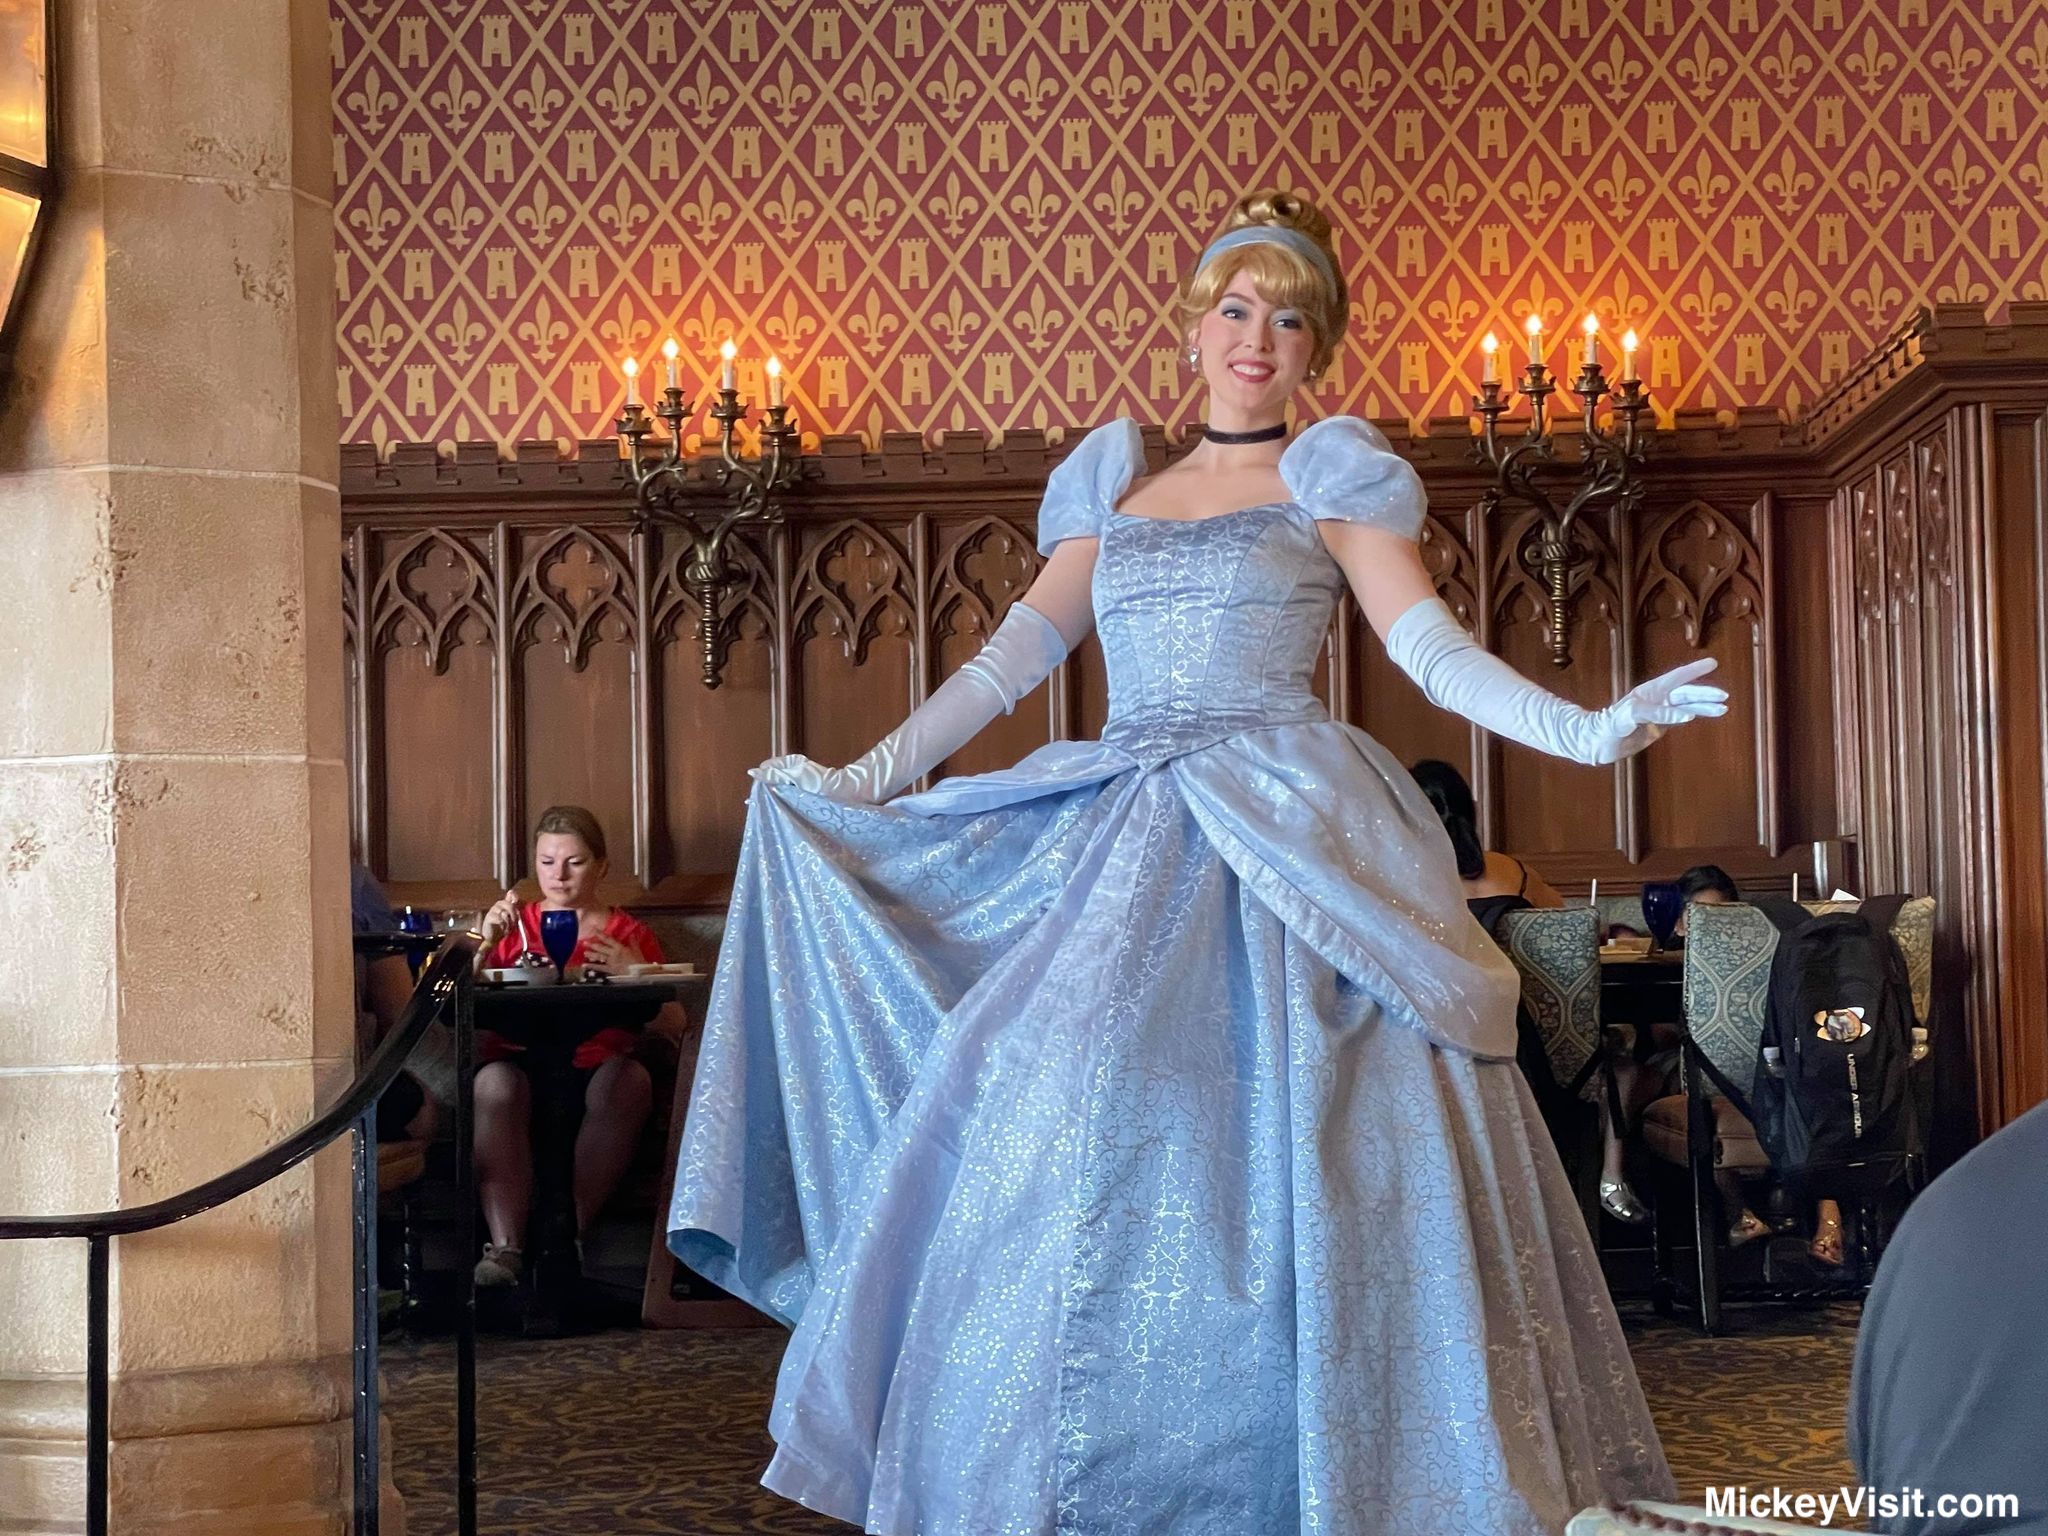 Disney Characters: Tips for Breakfasts and Meet & Greets - Disney Tourist  Blog